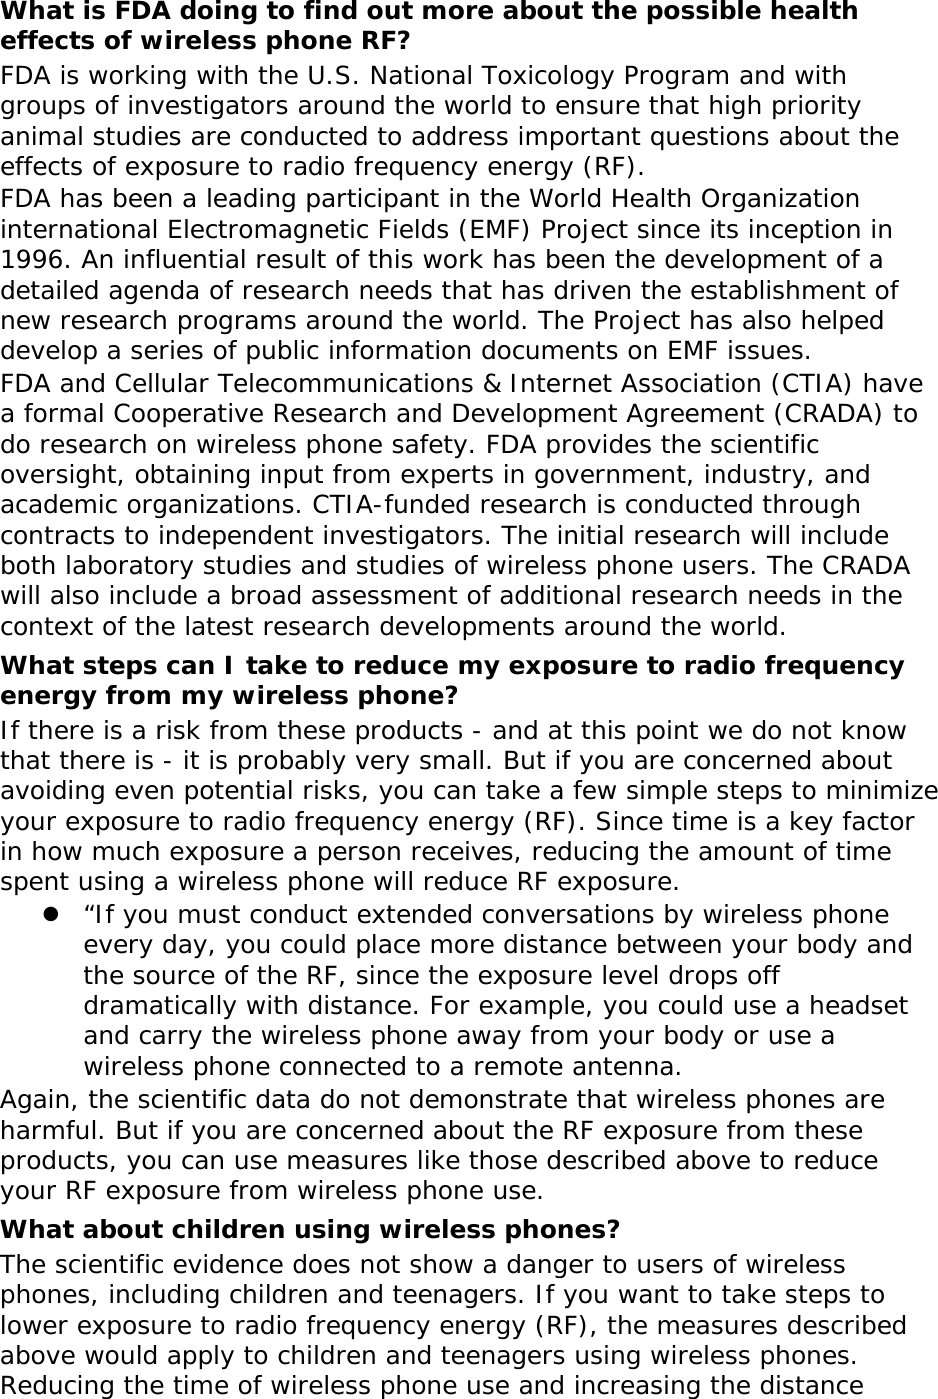 What is FDA doing to find out more about the possible health effects of wireless phone RF? FDA is working with the U.S. National Toxicology Program and with groups of investigators around the world to ensure that high priority animal studies are conducted to address important questions about the effects of exposure to radio frequency energy (RF). FDA has been a leading participant in the World Health Organization international Electromagnetic Fields (EMF) Project since its inception in 1996. An influential result of this work has been the development of a detailed agenda of research needs that has driven the establishment of new research programs around the world. The Project has also helped develop a series of public information documents on EMF issues. FDA and Cellular Telecommunications &amp; Internet Association (CTIA) have a formal Cooperative Research and Development Agreement (CRADA) to do research on wireless phone safety. FDA provides the scientific oversight, obtaining input from experts in government, industry, and academic organizations. CTIA-funded research is conducted through contracts to independent investigators. The initial research will include both laboratory studies and studies of wireless phone users. The CRADA will also include a broad assessment of additional research needs in the context of the latest research developments around the world. What steps can I take to reduce my exposure to radio frequency energy from my wireless phone? If there is a risk from these products - and at this point we do not know that there is - it is probably very small. But if you are concerned about avoiding even potential risks, you can take a few simple steps to minimize your exposure to radio frequency energy (RF). Since time is a key factor in how much exposure a person receives, reducing the amount of time spent using a wireless phone will reduce RF exposure.  “If you must conduct extended conversations by wireless phone every day, you could place more distance between your body and the source of the RF, since the exposure level drops off dramatically with distance. For example, you could use a headset and carry the wireless phone away from your body or use a wireless phone connected to a remote antenna. Again, the scientific data do not demonstrate that wireless phones are harmful. But if you are concerned about the RF exposure from these products, you can use measures like those described above to reduce your RF exposure from wireless phone use. What about children using wireless phones? The scientific evidence does not show a danger to users of wireless phones, including children and teenagers. If you want to take steps to lower exposure to radio frequency energy (RF), the measures described above would apply to children and teenagers using wireless phones. Reducing the time of wireless phone use and increasing the distance 